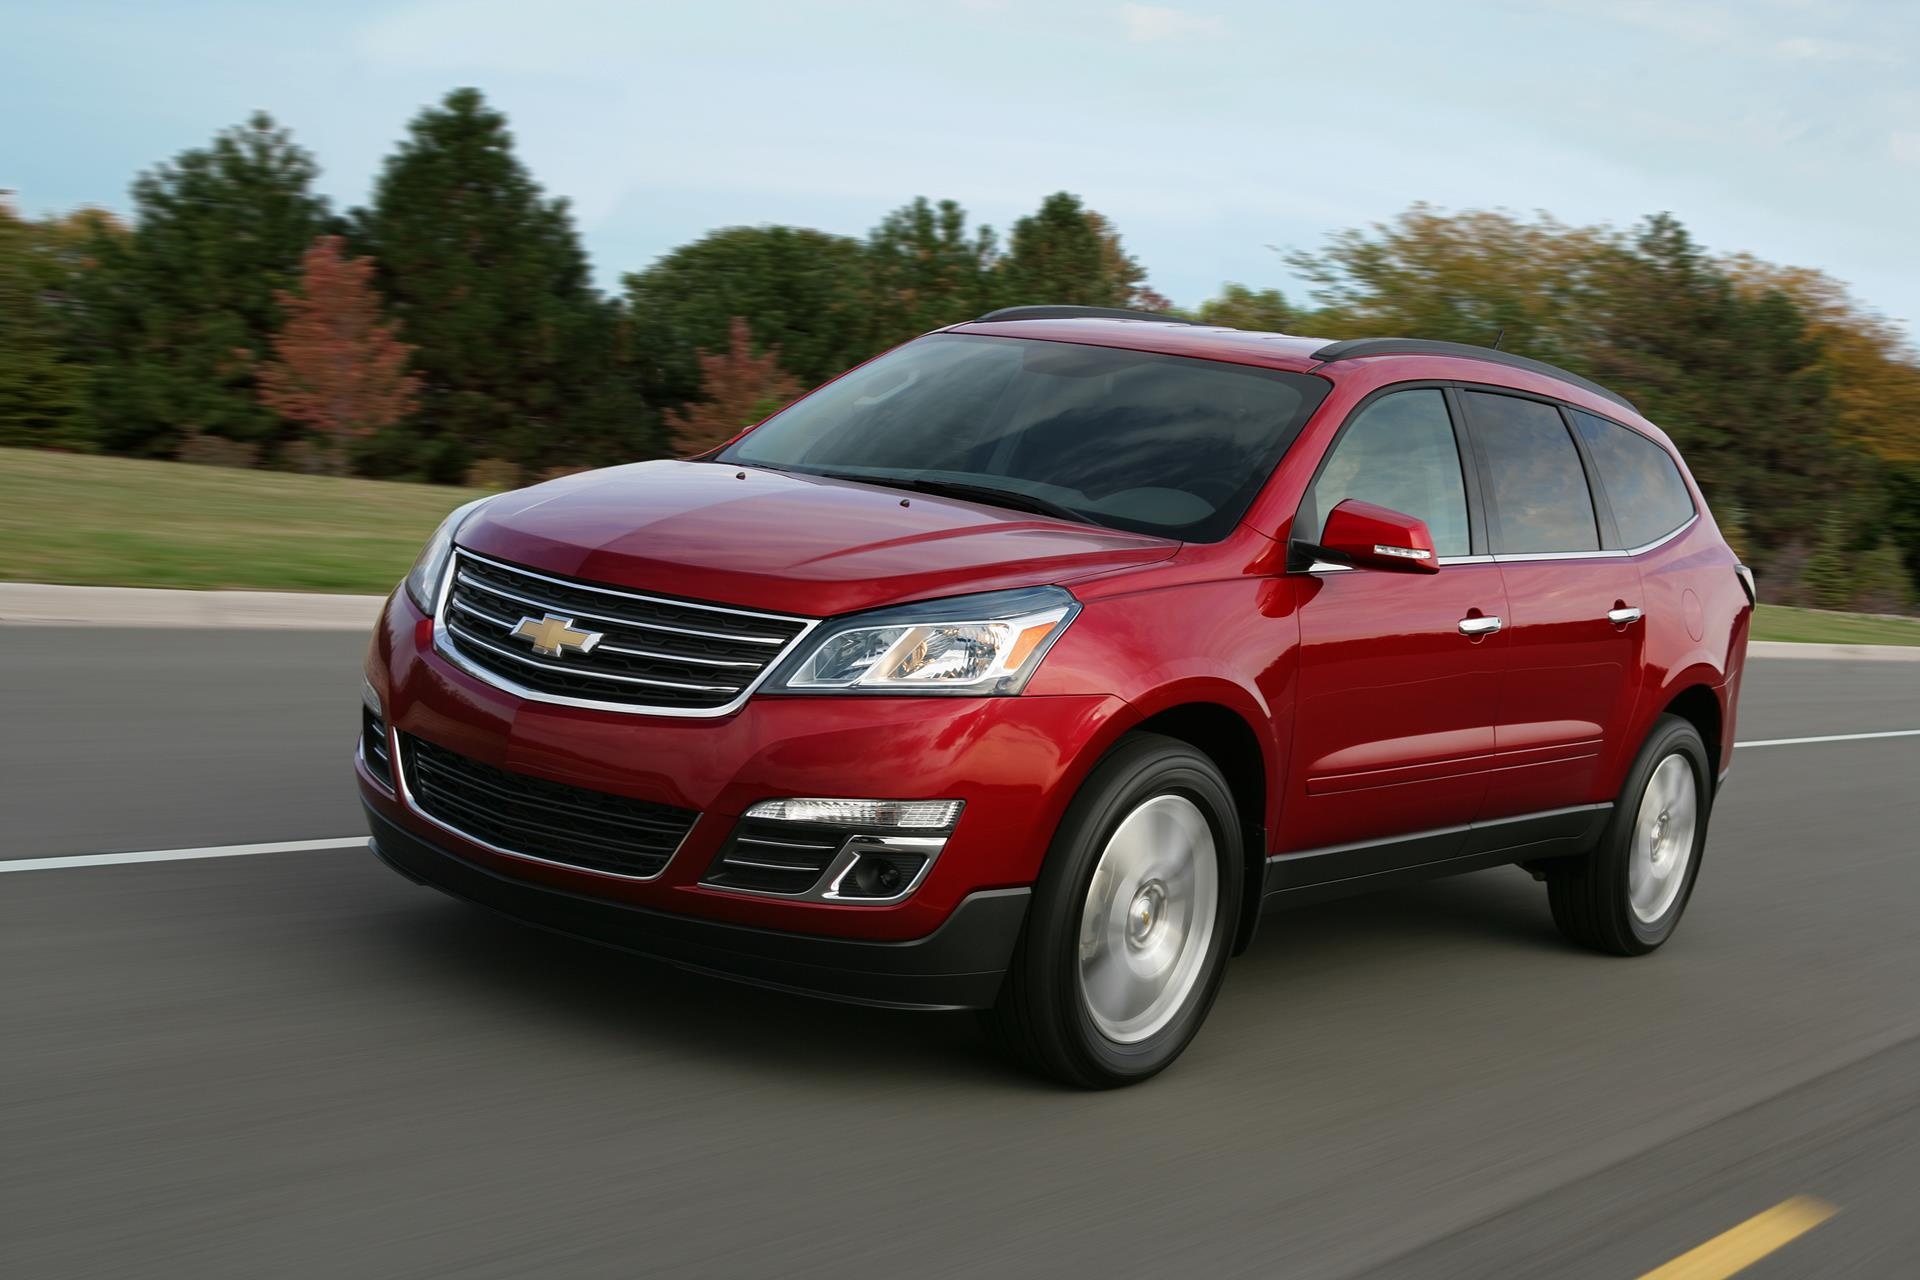 Chevrolet Traverse, Spacious and versatile, High-definition wallpapers, Family-friendly, 1920x1280 HD Desktop